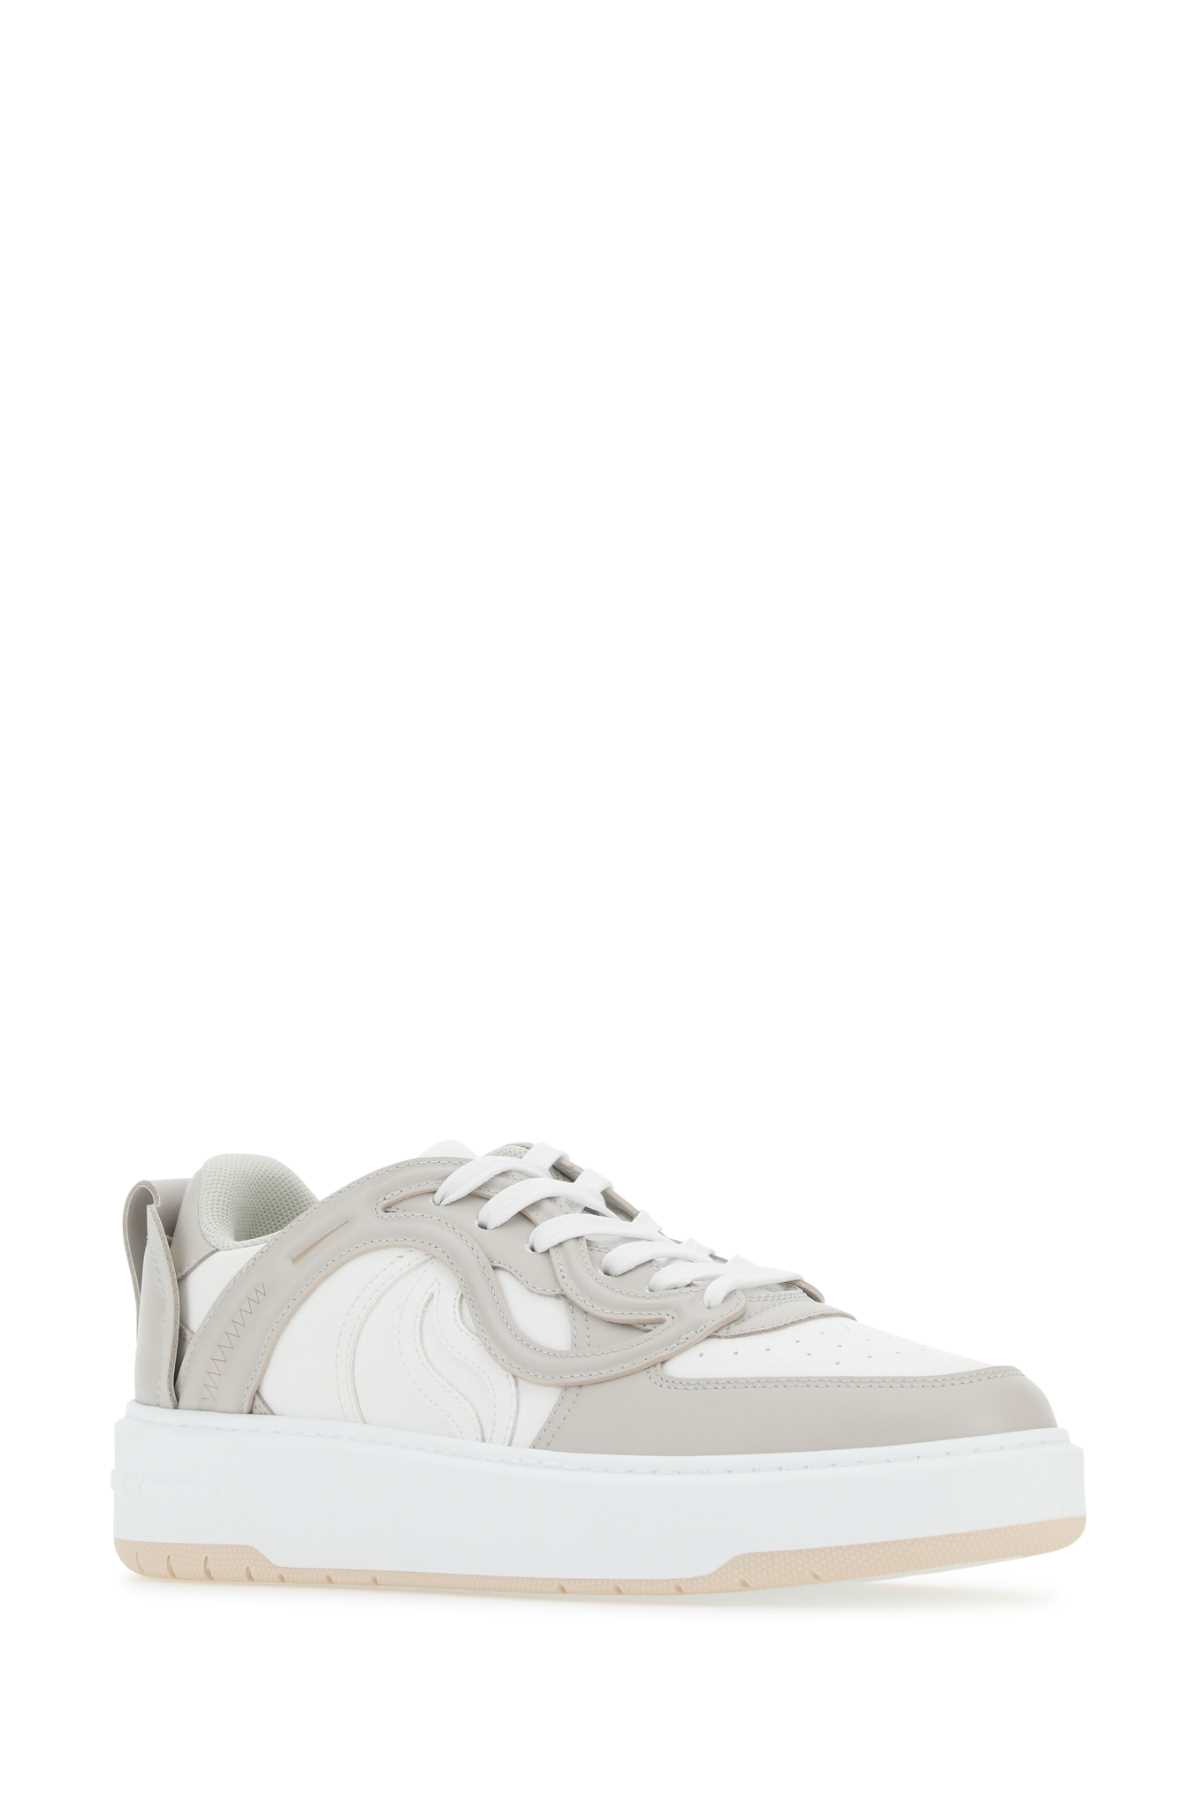 STELLA MCCARTNEY TWO-TONE ALTER MAT S WAVE 1 SNEAKERS